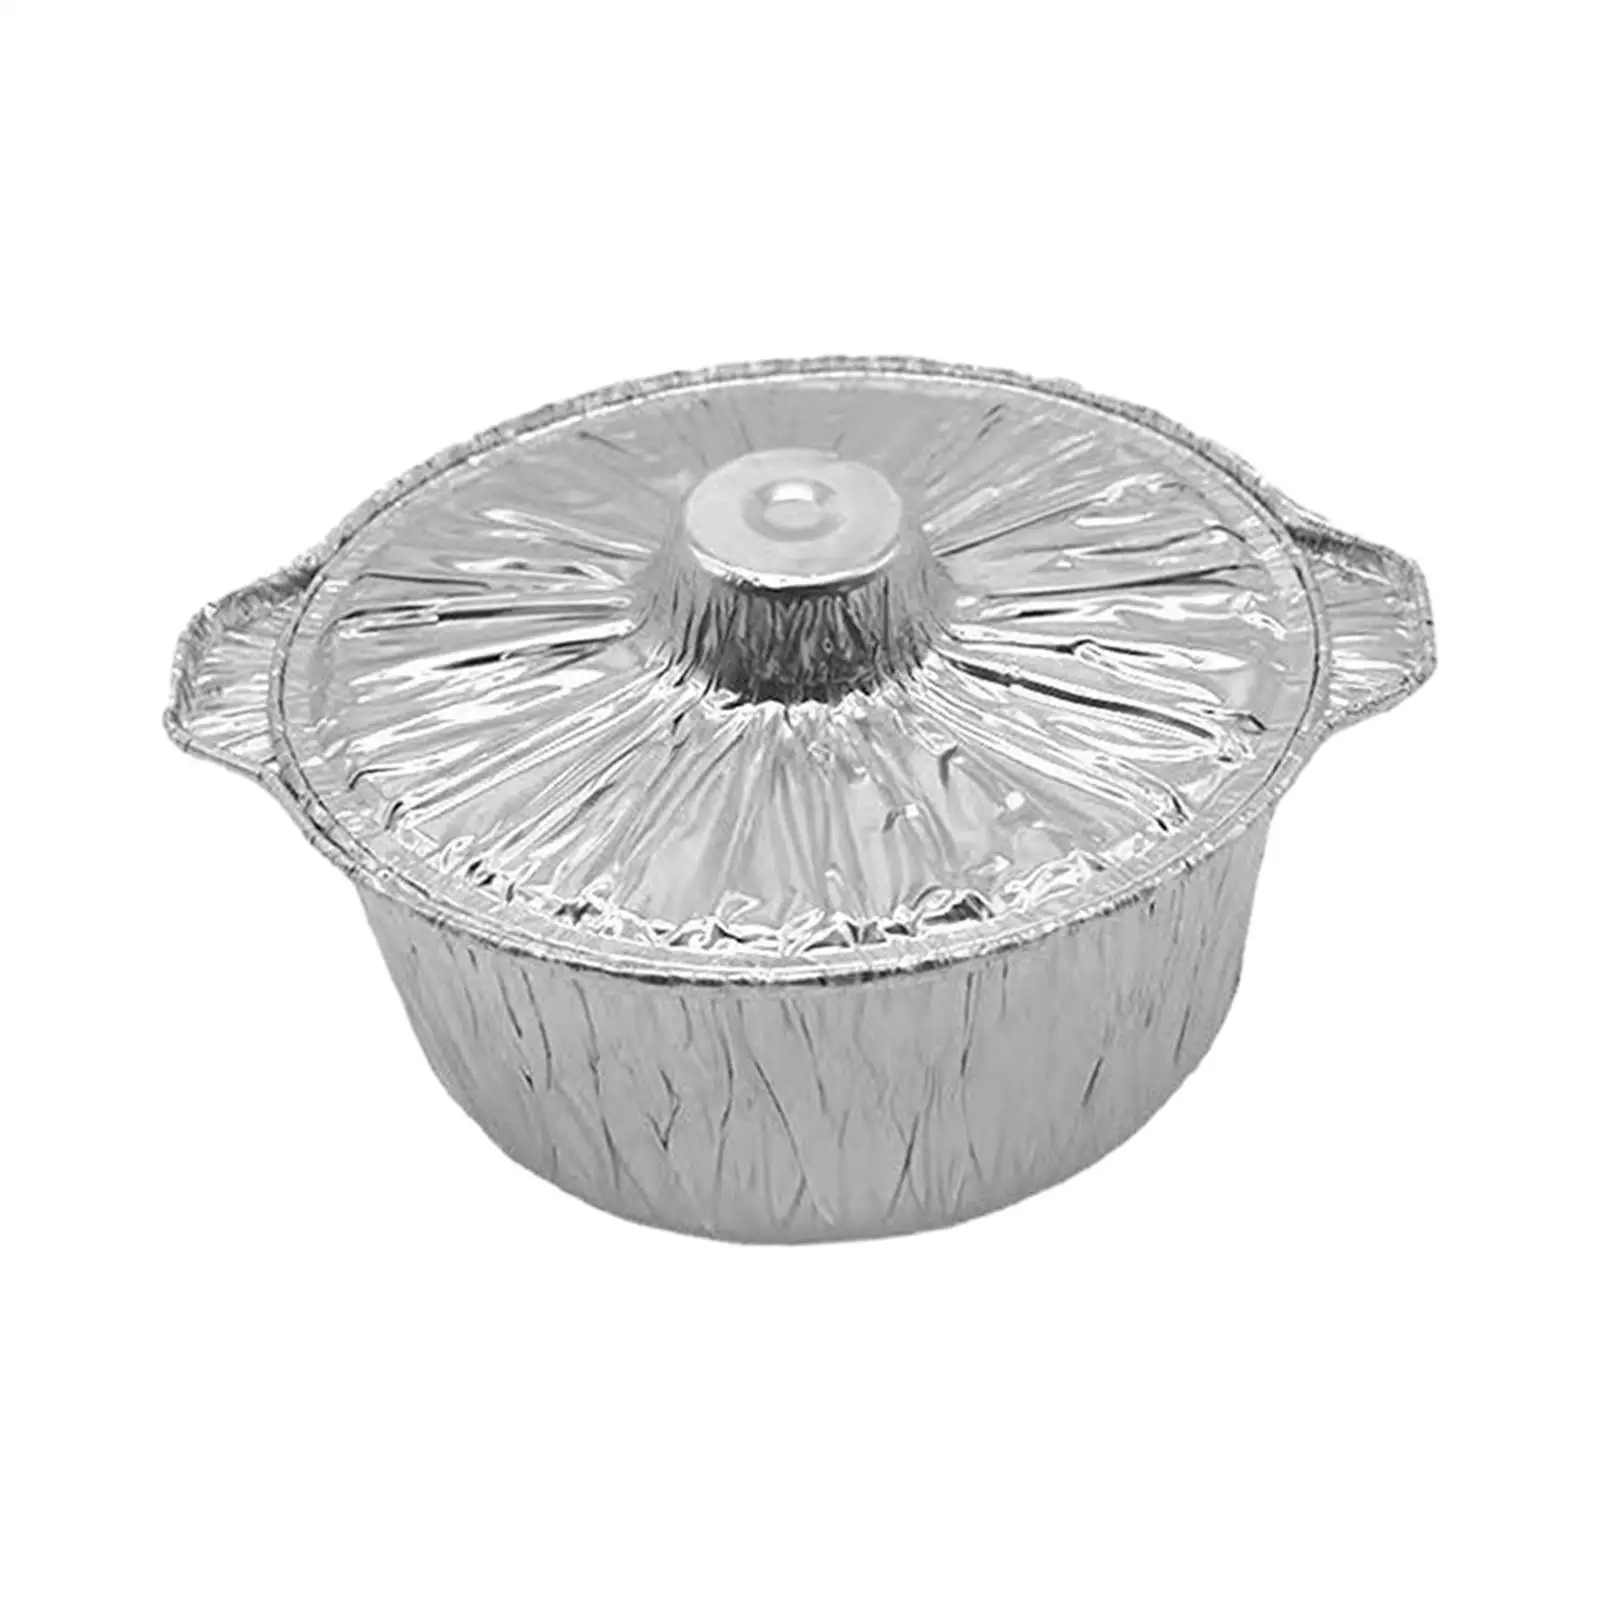 Meat Pot Bakeware Cake Pan Pie Pan Stockpot Disposable Cooking Pot Baking Tin Pot for Events Vacation Barbecue Broiling Trips